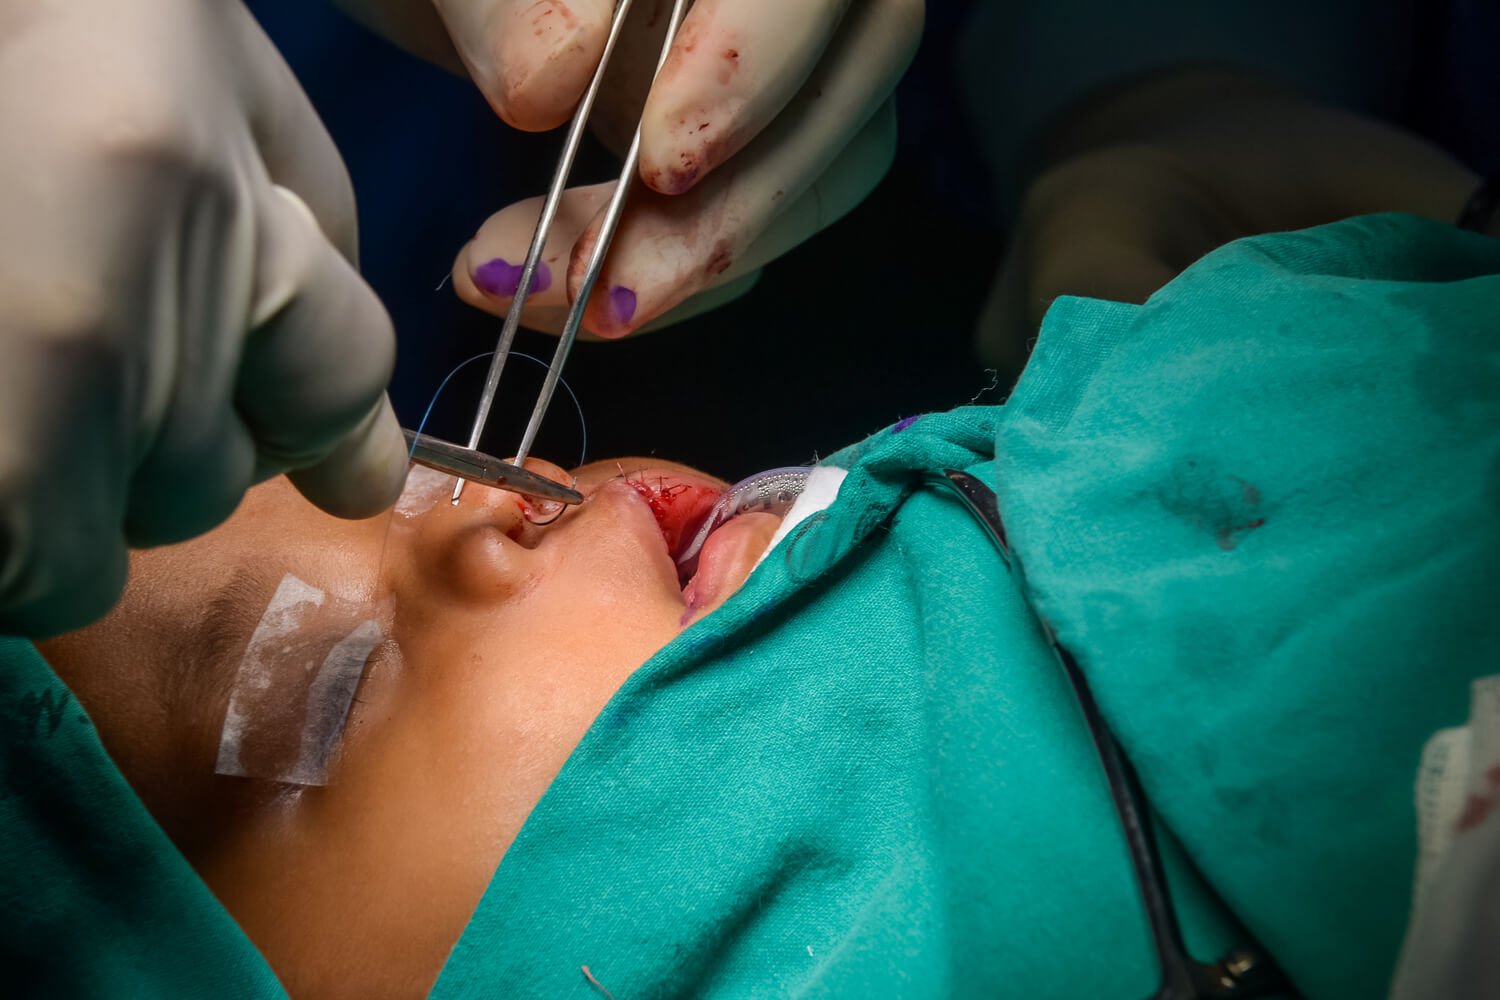 surgery to treat cleft lip